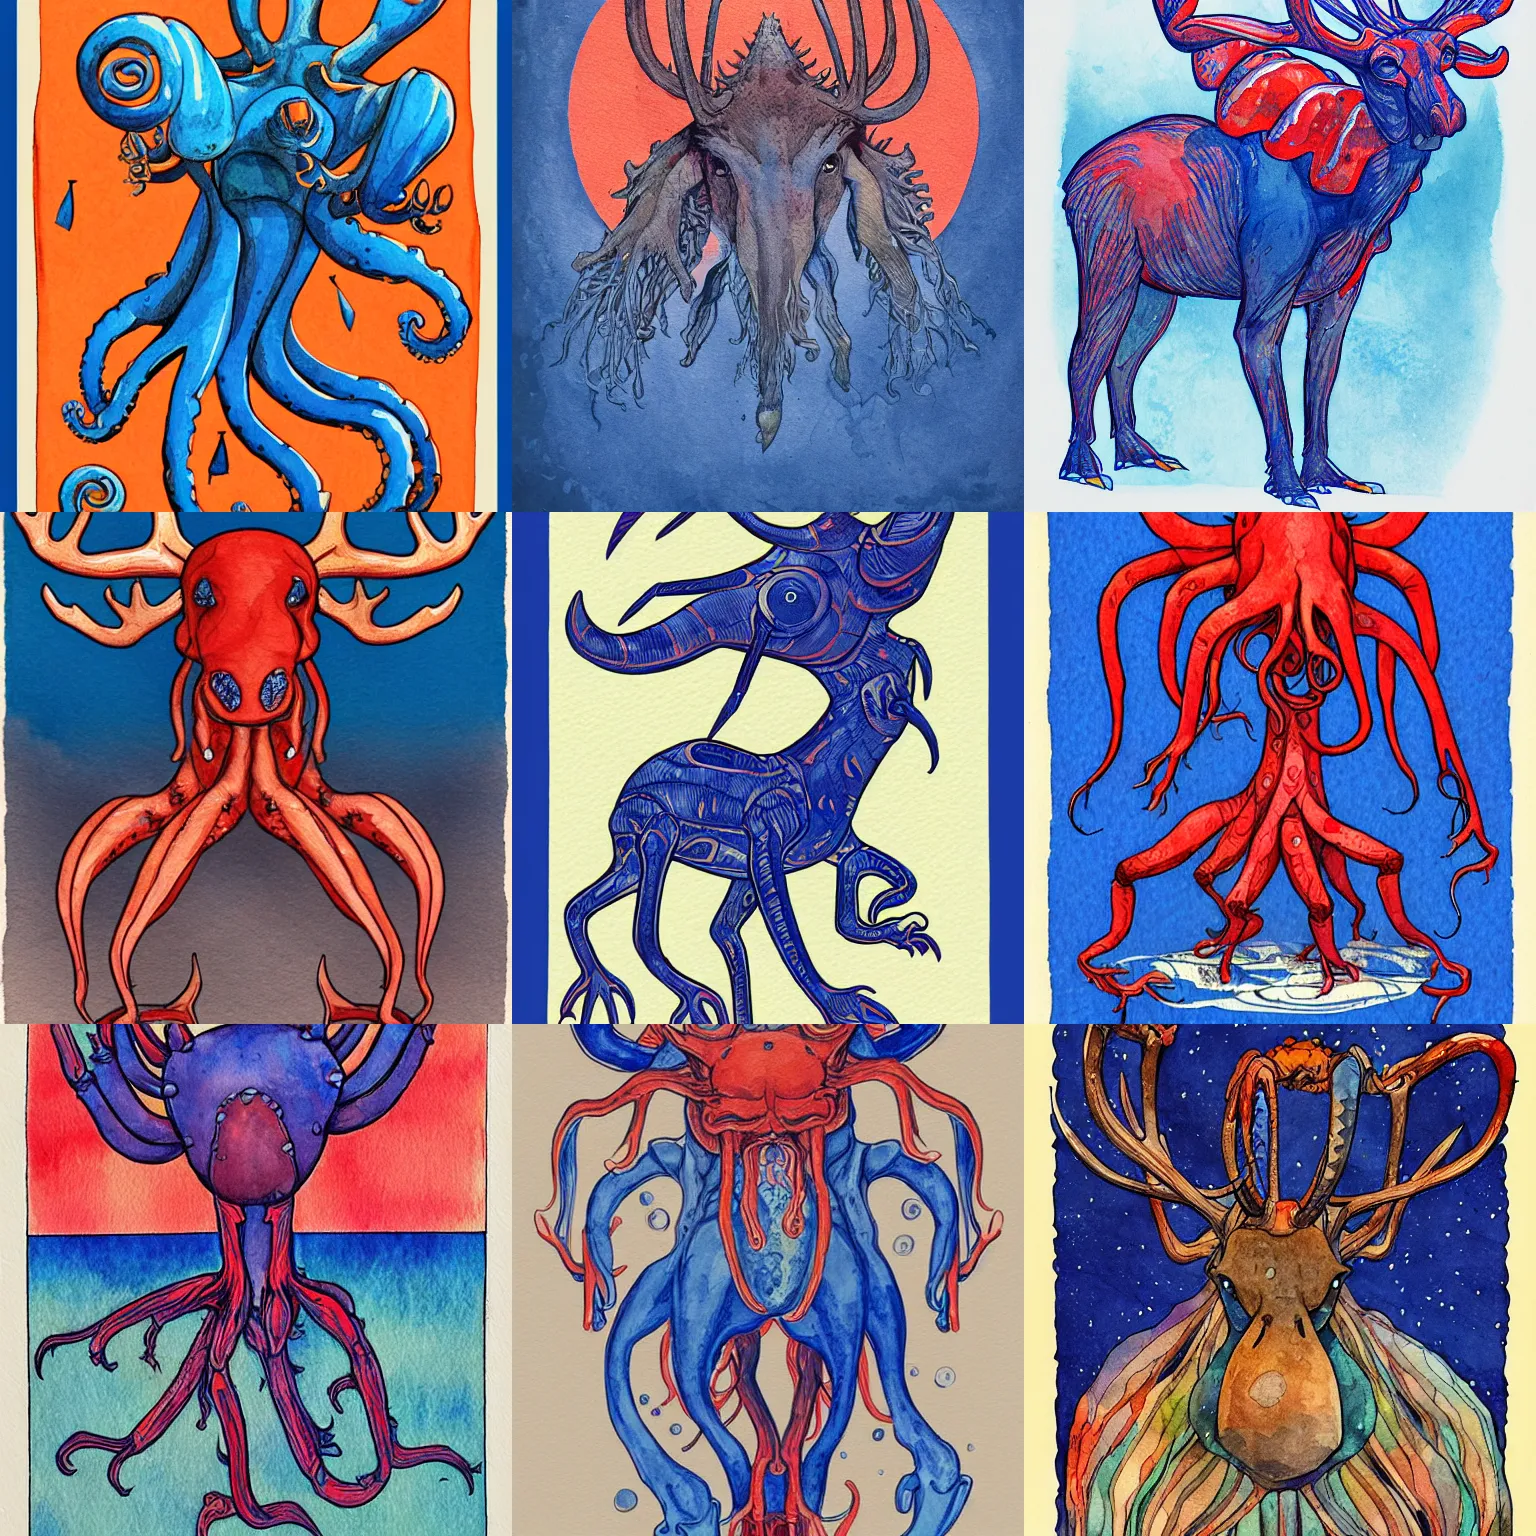 Prompt: octopod turkey - moose creature with four arms and long neck, arms growing from chest, pinchers | romanticist, art nouveau illustration, figurative art, loose linework, watercolor wash over inks, cadmium red, cobalt blue, payne's grey, luminism